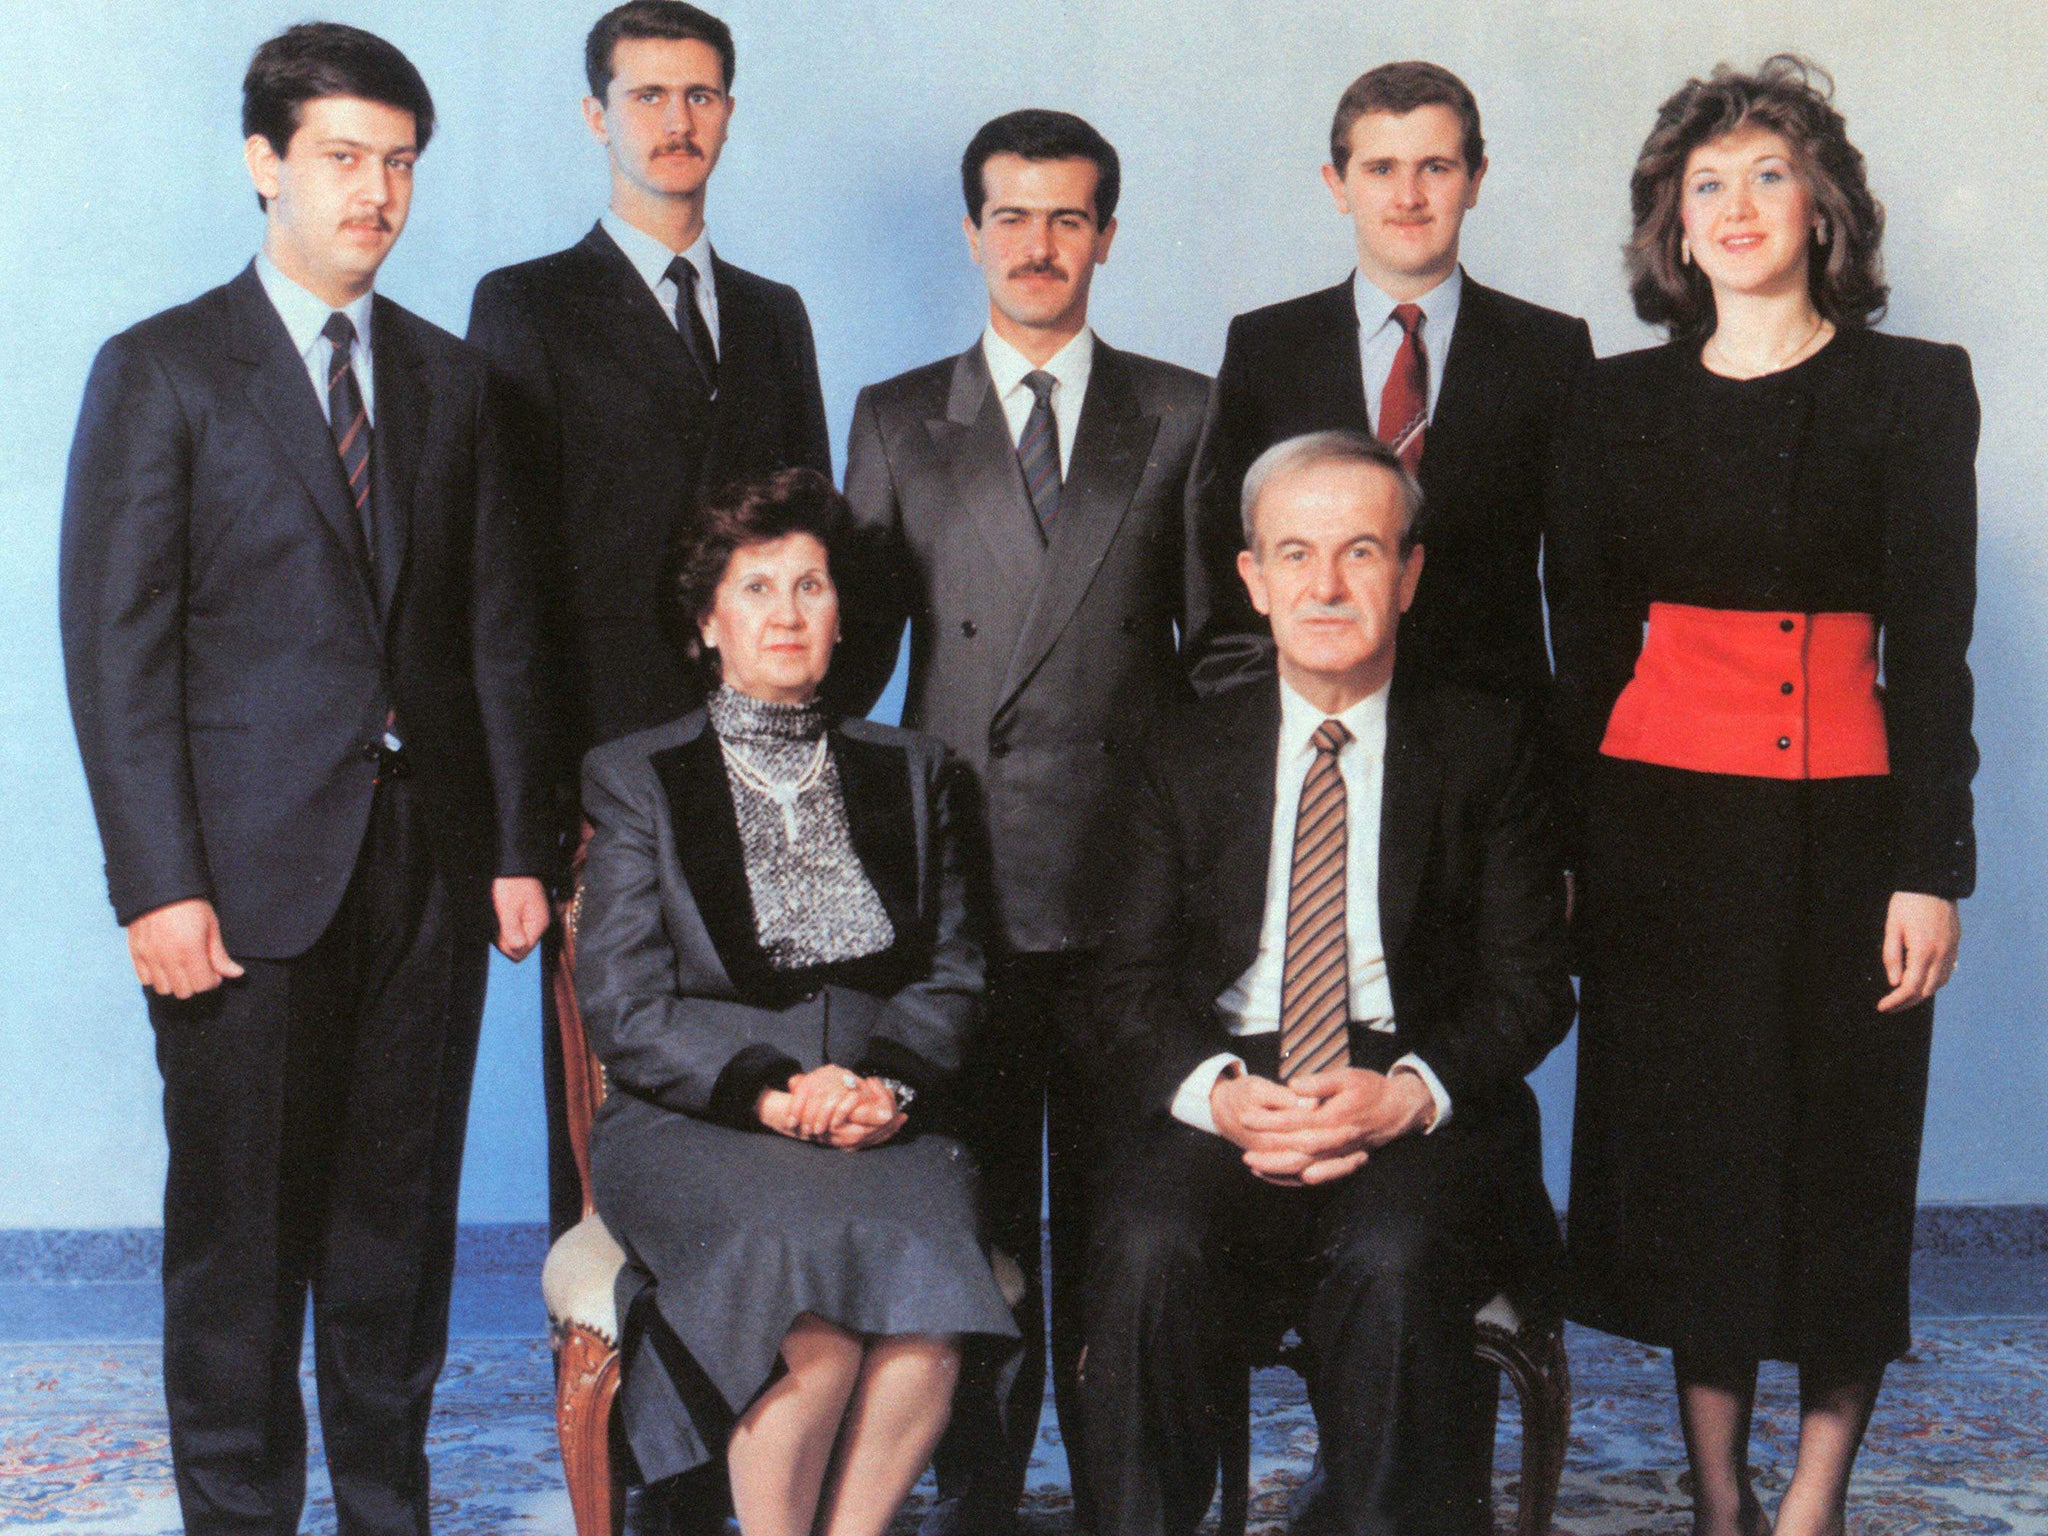 Former Syrian President Hafez al-Assad, front right, beside his wife Anissa, and family behind, including Bashar al-Assad, second from left, in 1986